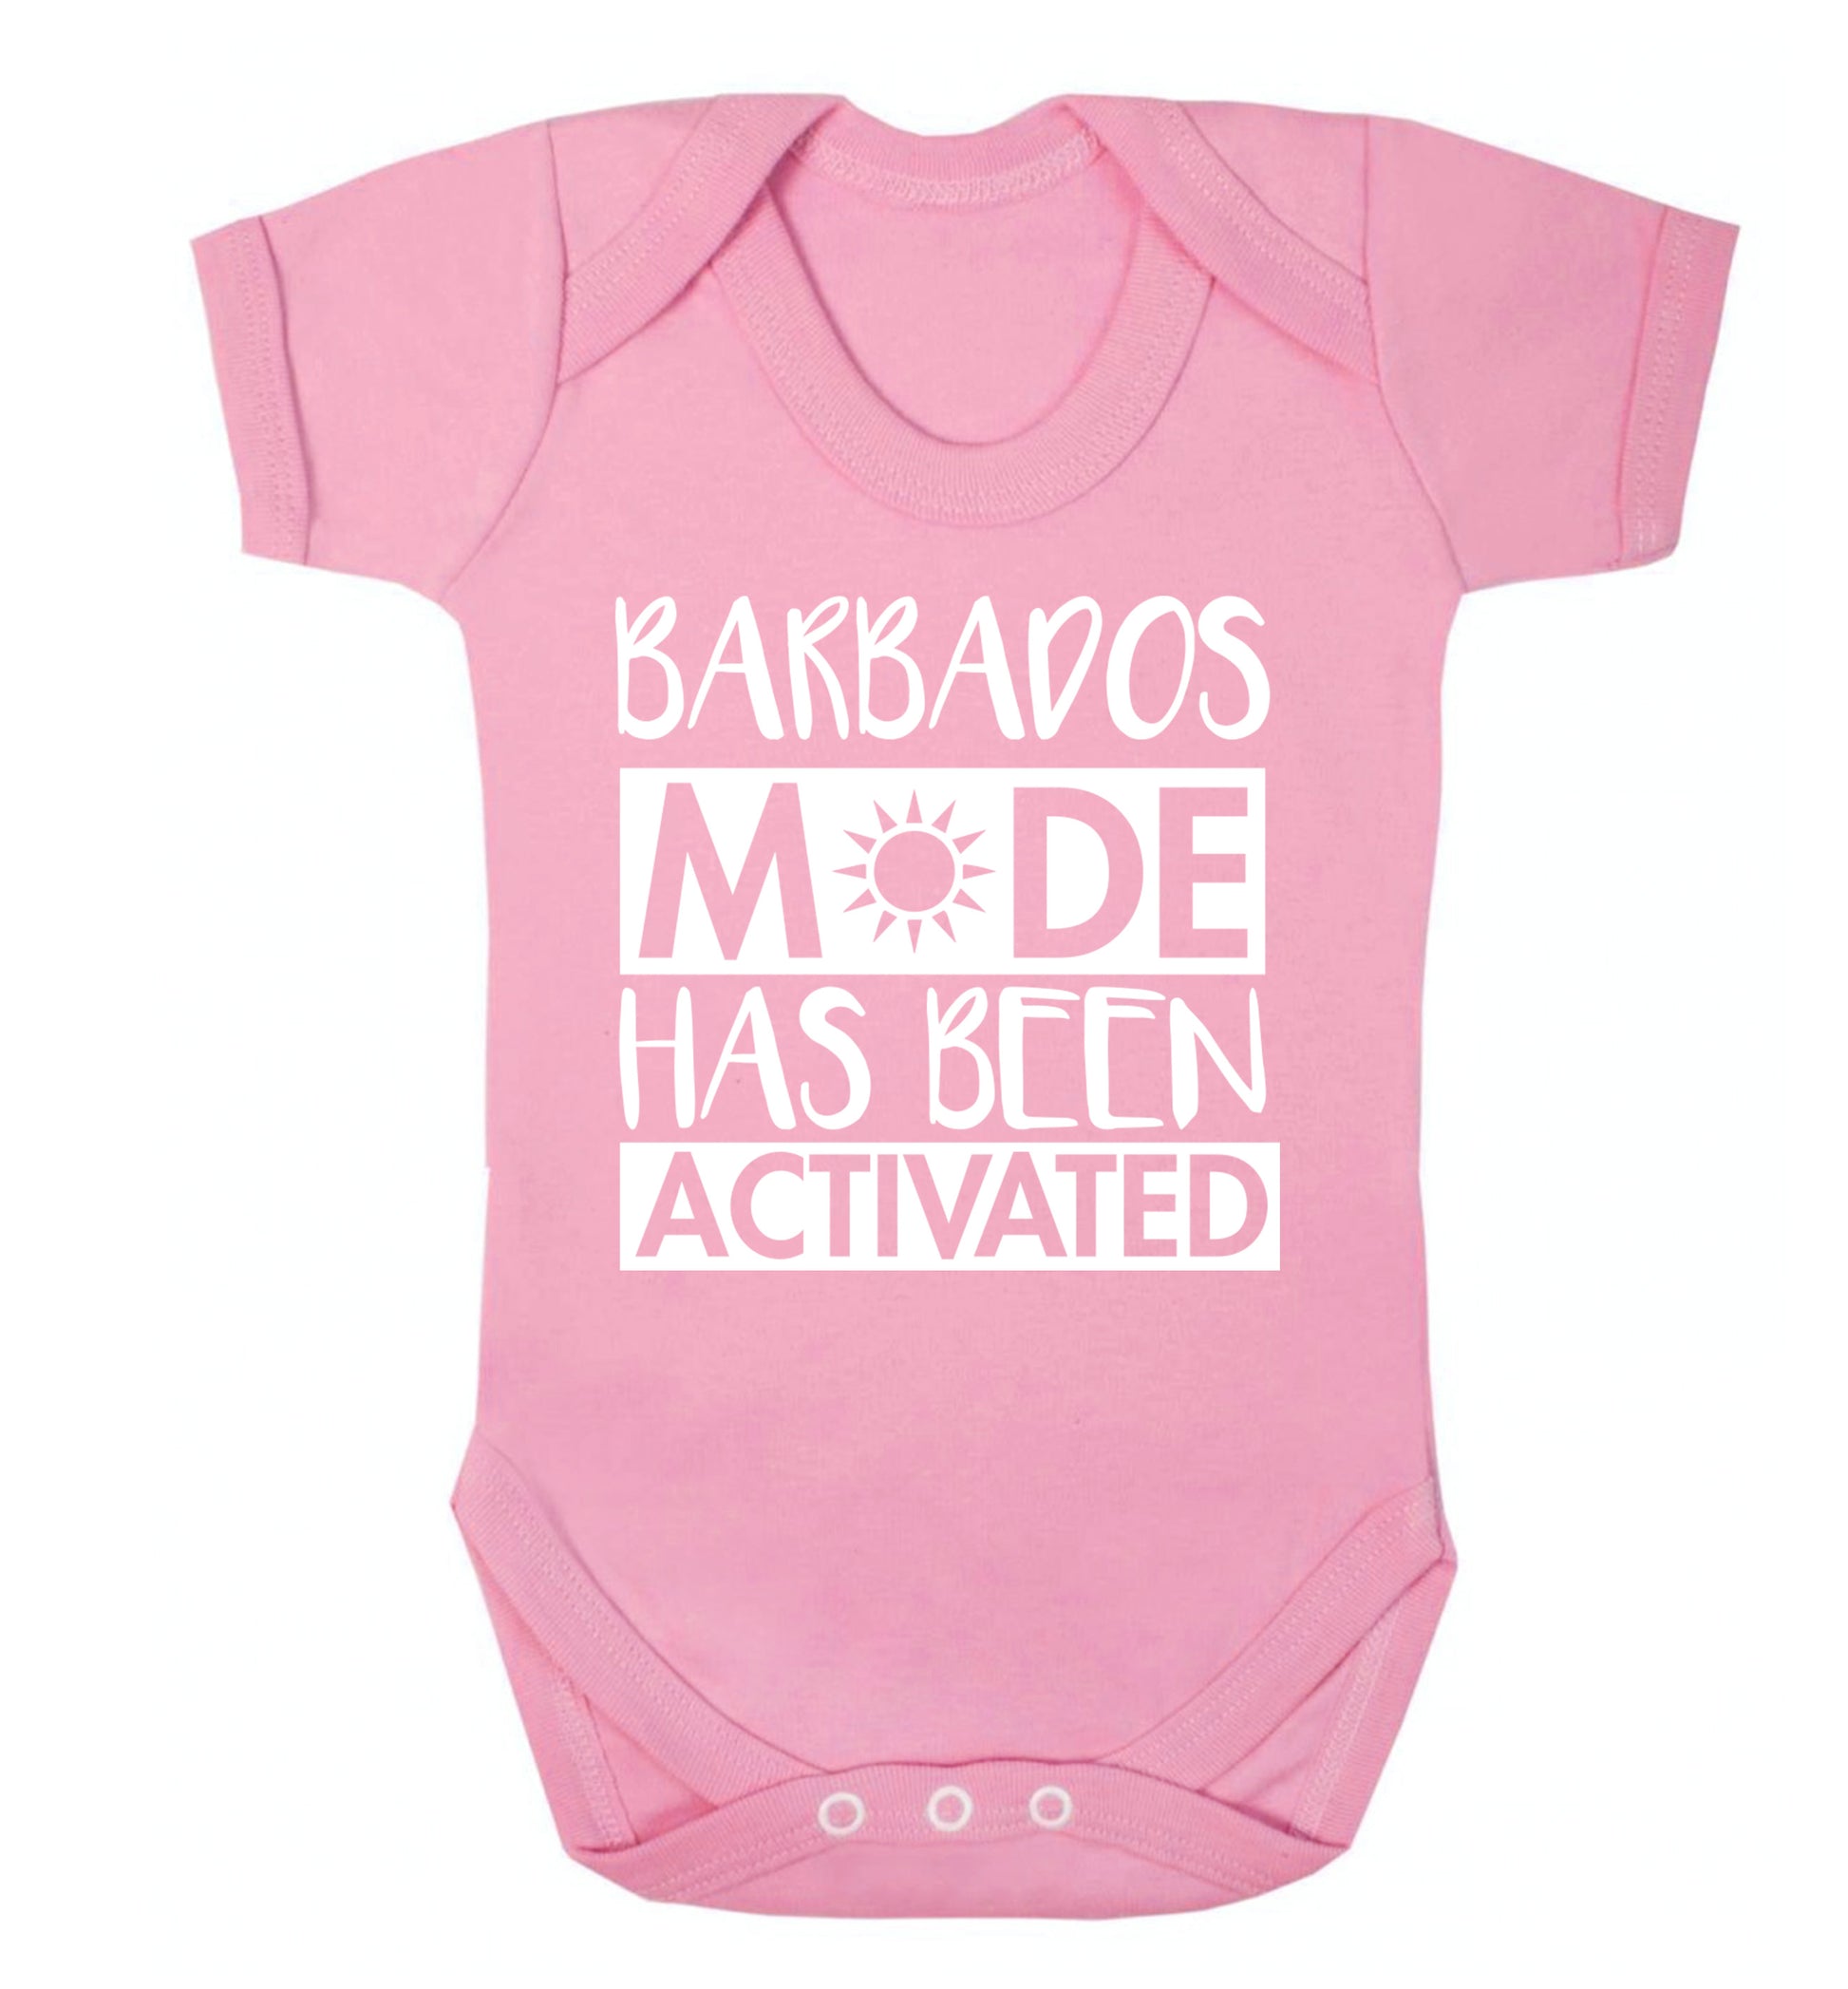 Barbados mode has been activated Baby Vest pale pink 18-24 months